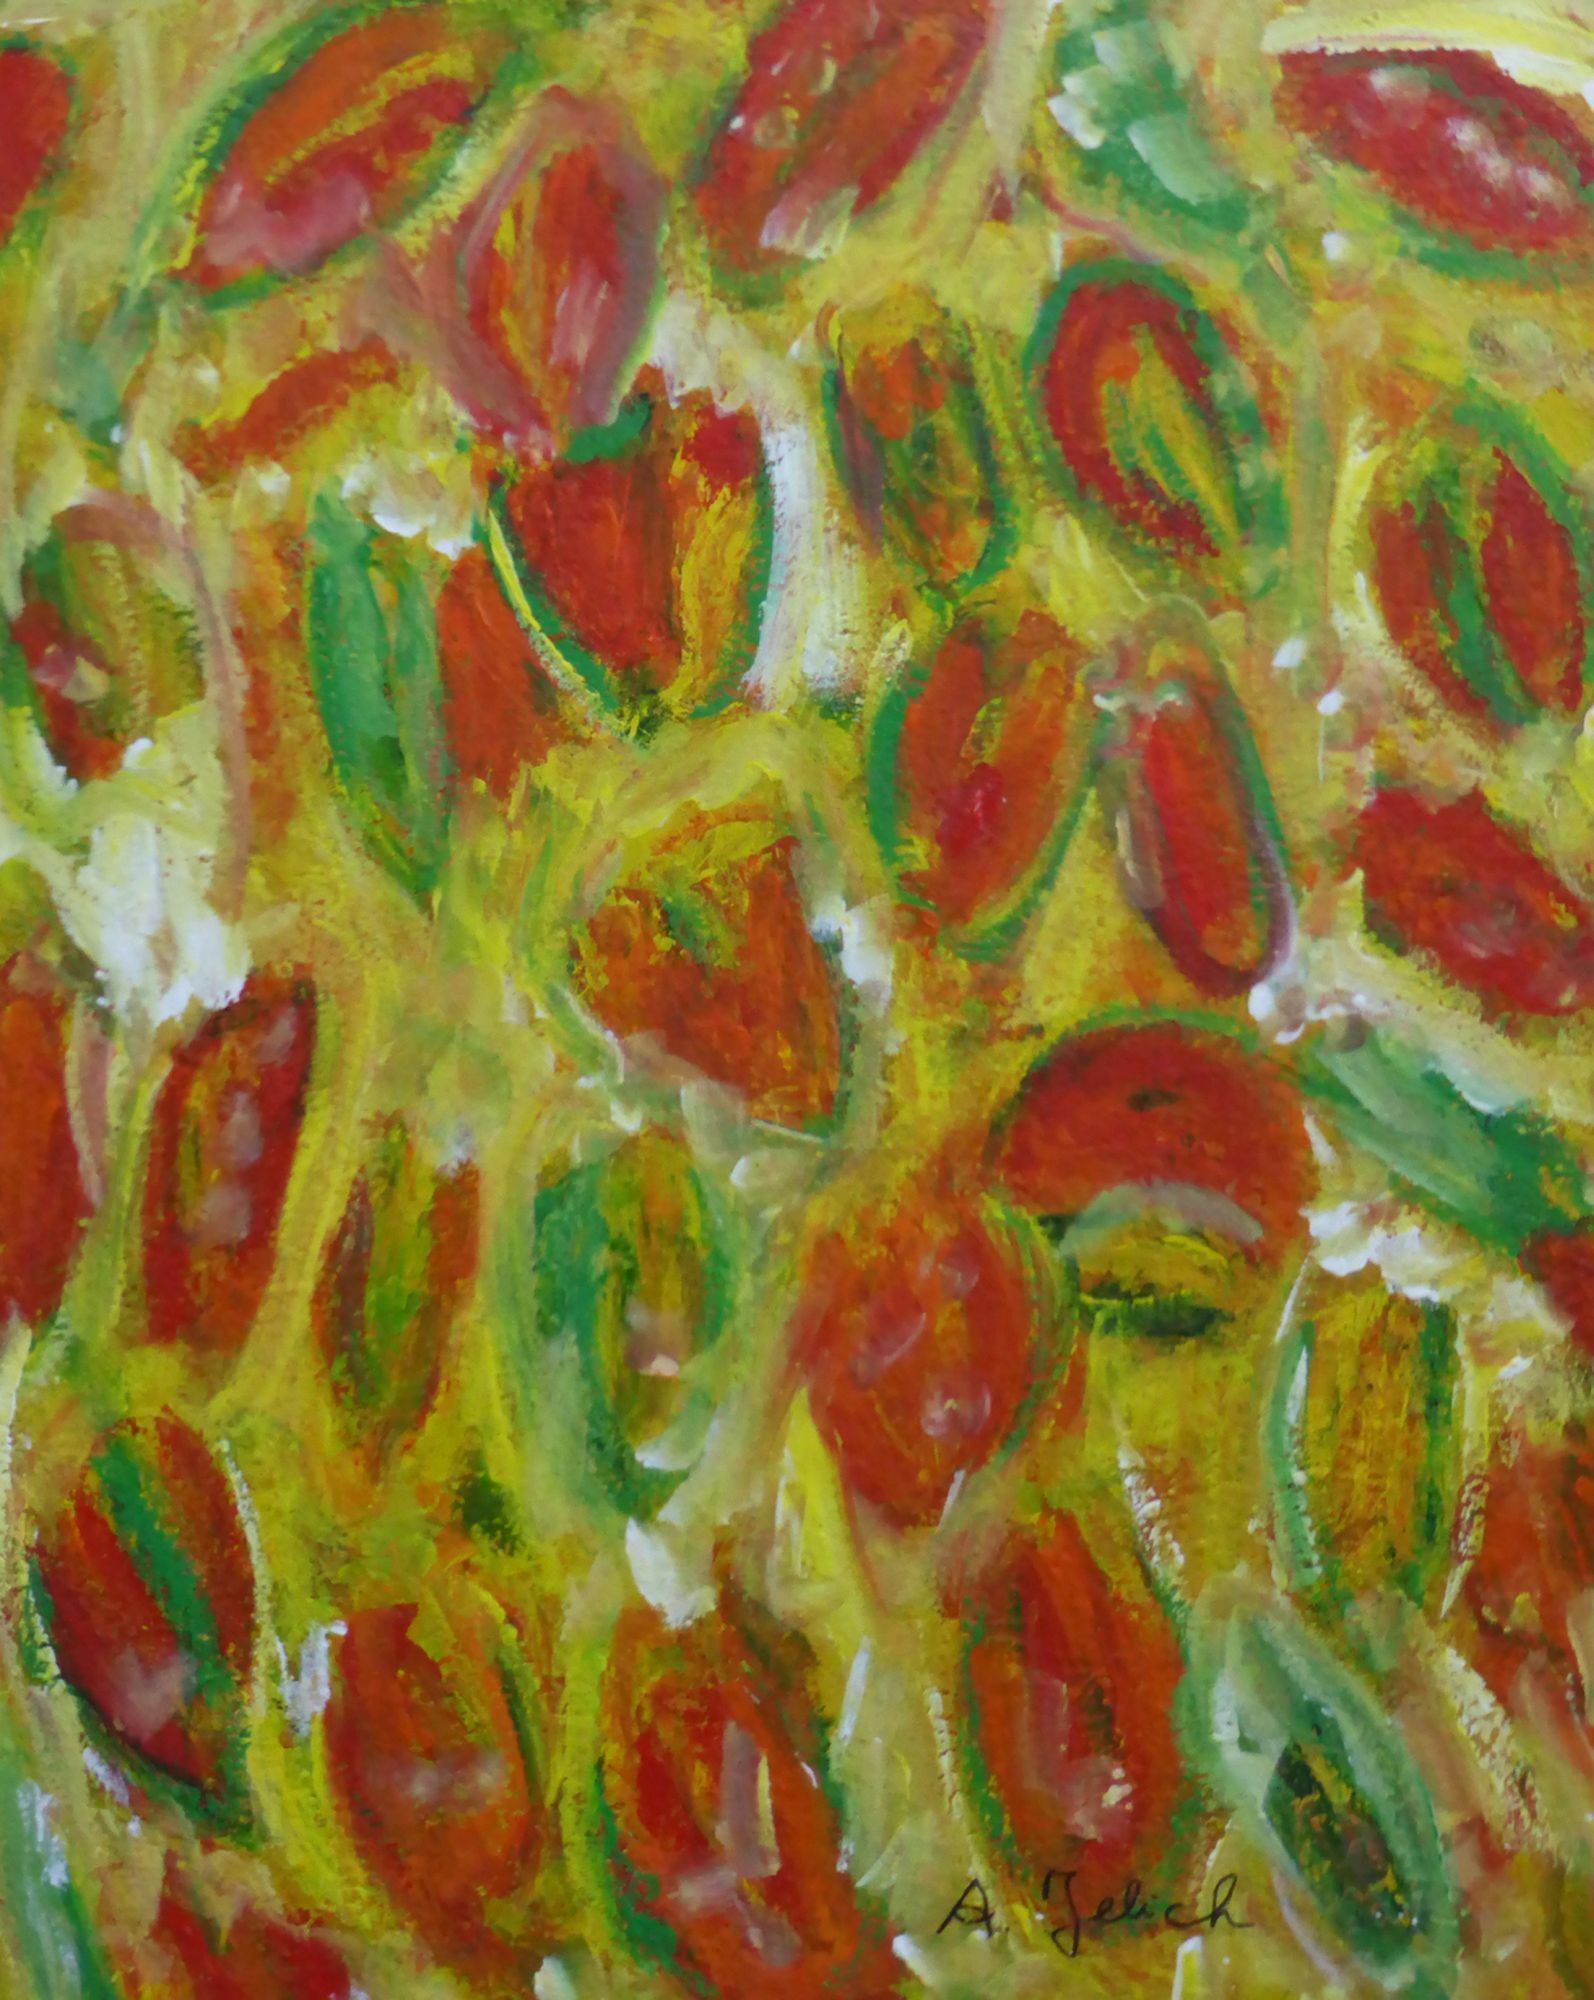 Picture "Tulip Heart" (2013) (Unique piece) by Angelika Jelich